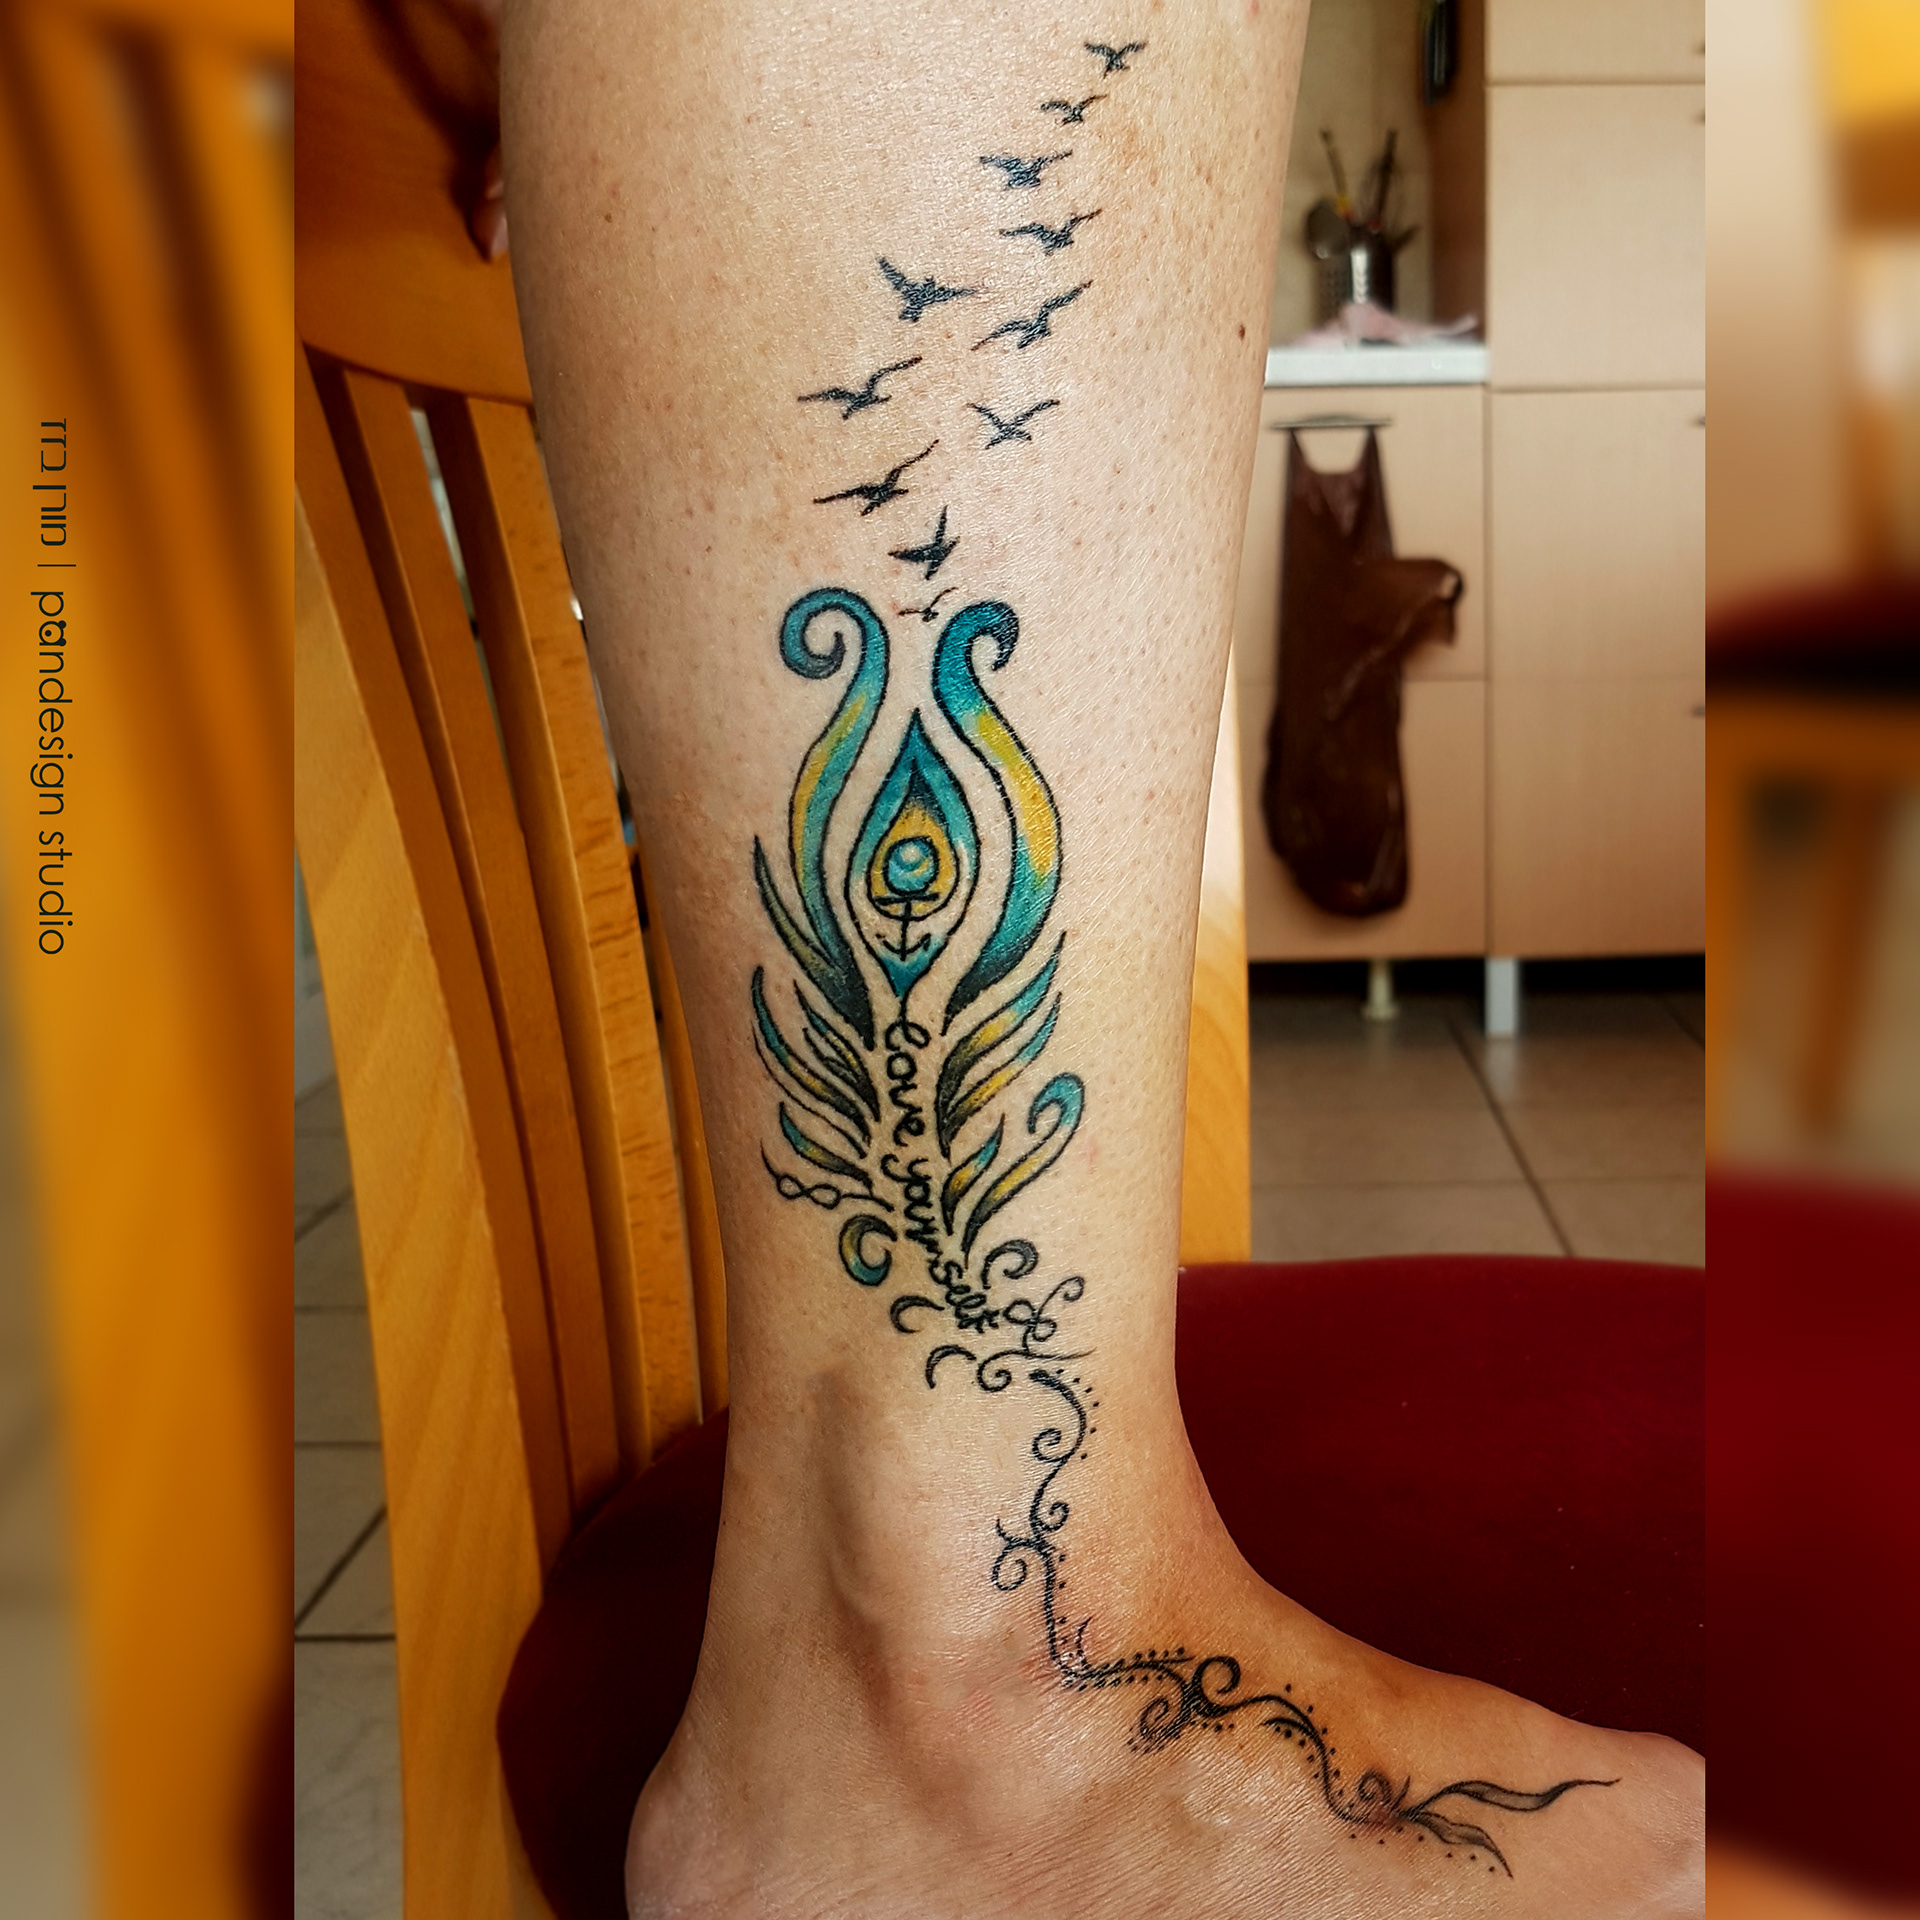 Popular Peacock Feathers Tattoos You Must Get Inked - Tattoo Trends